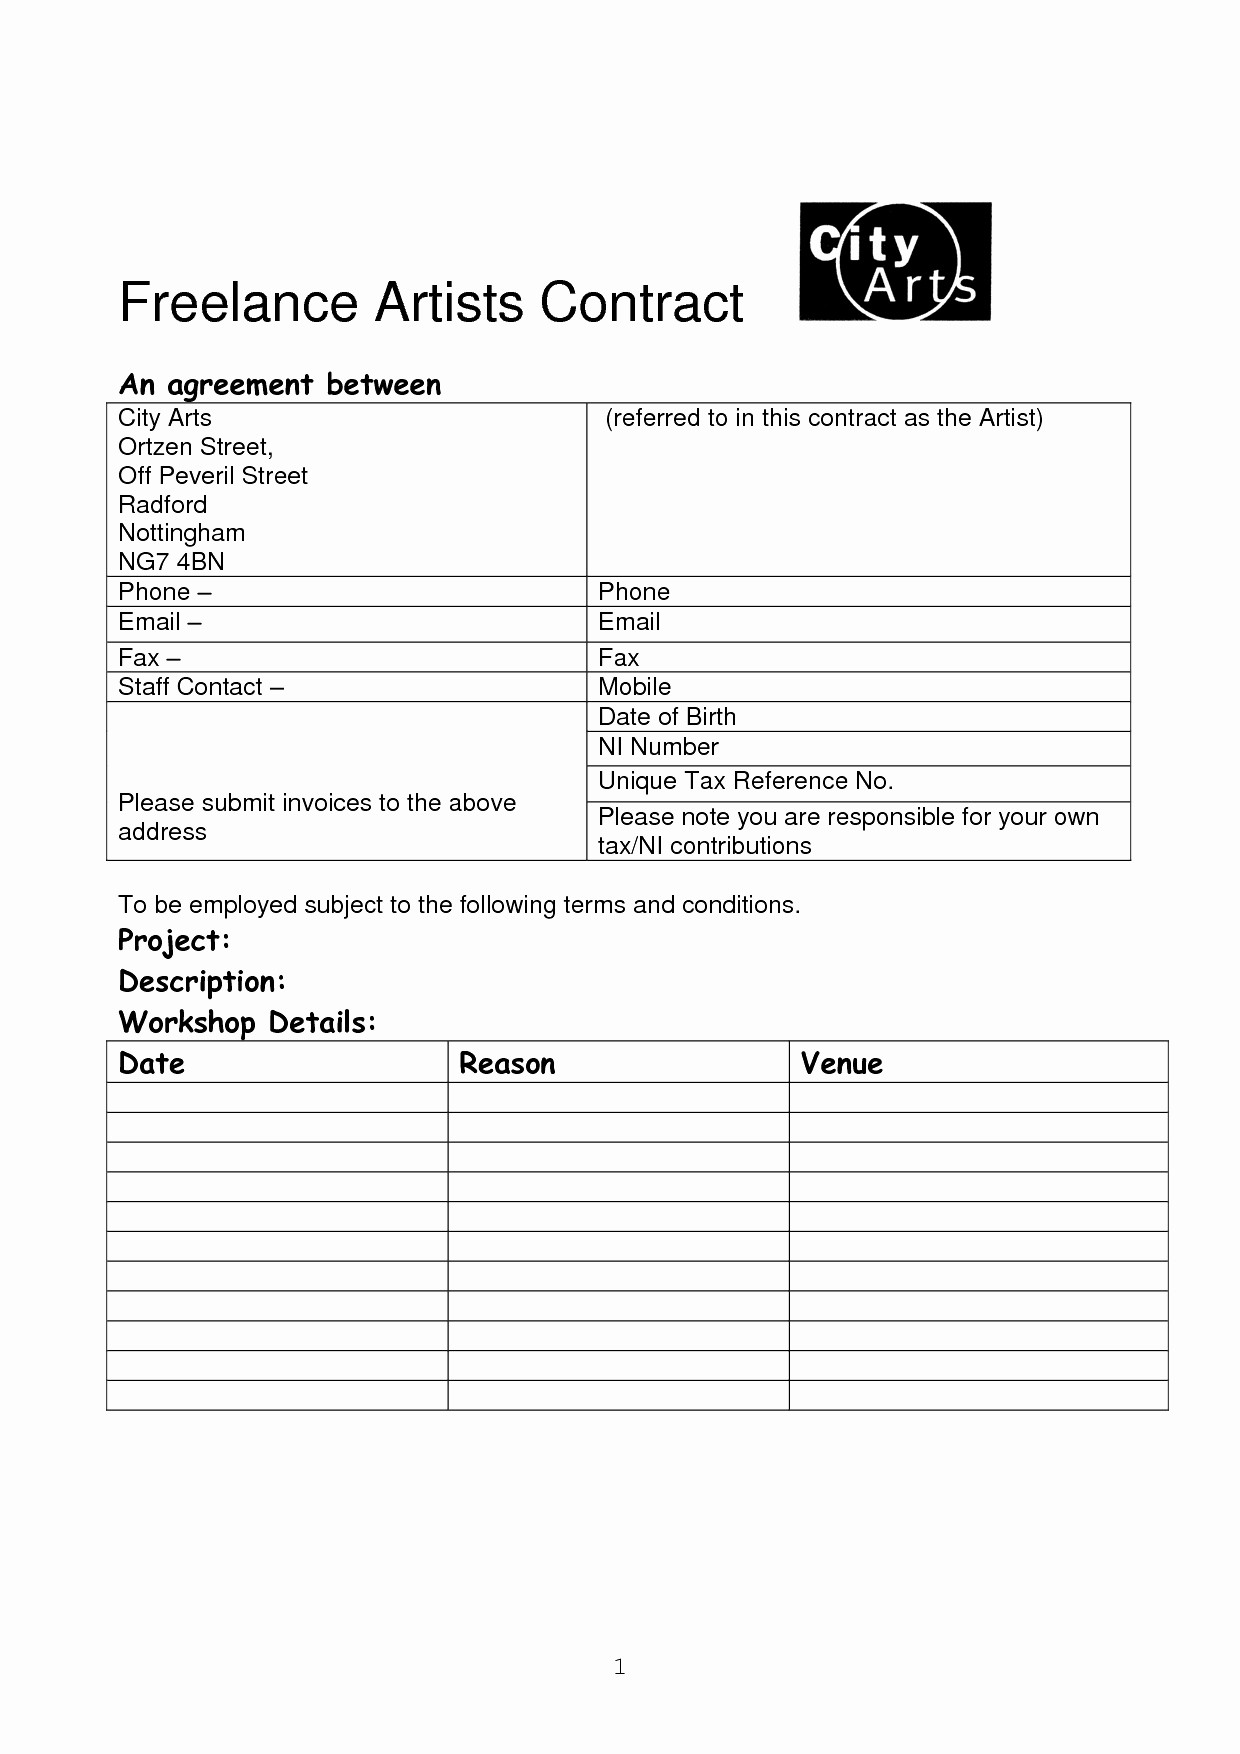 50 Lovely Freelance Art Contract Template DOCUMENTS IDEAS Document